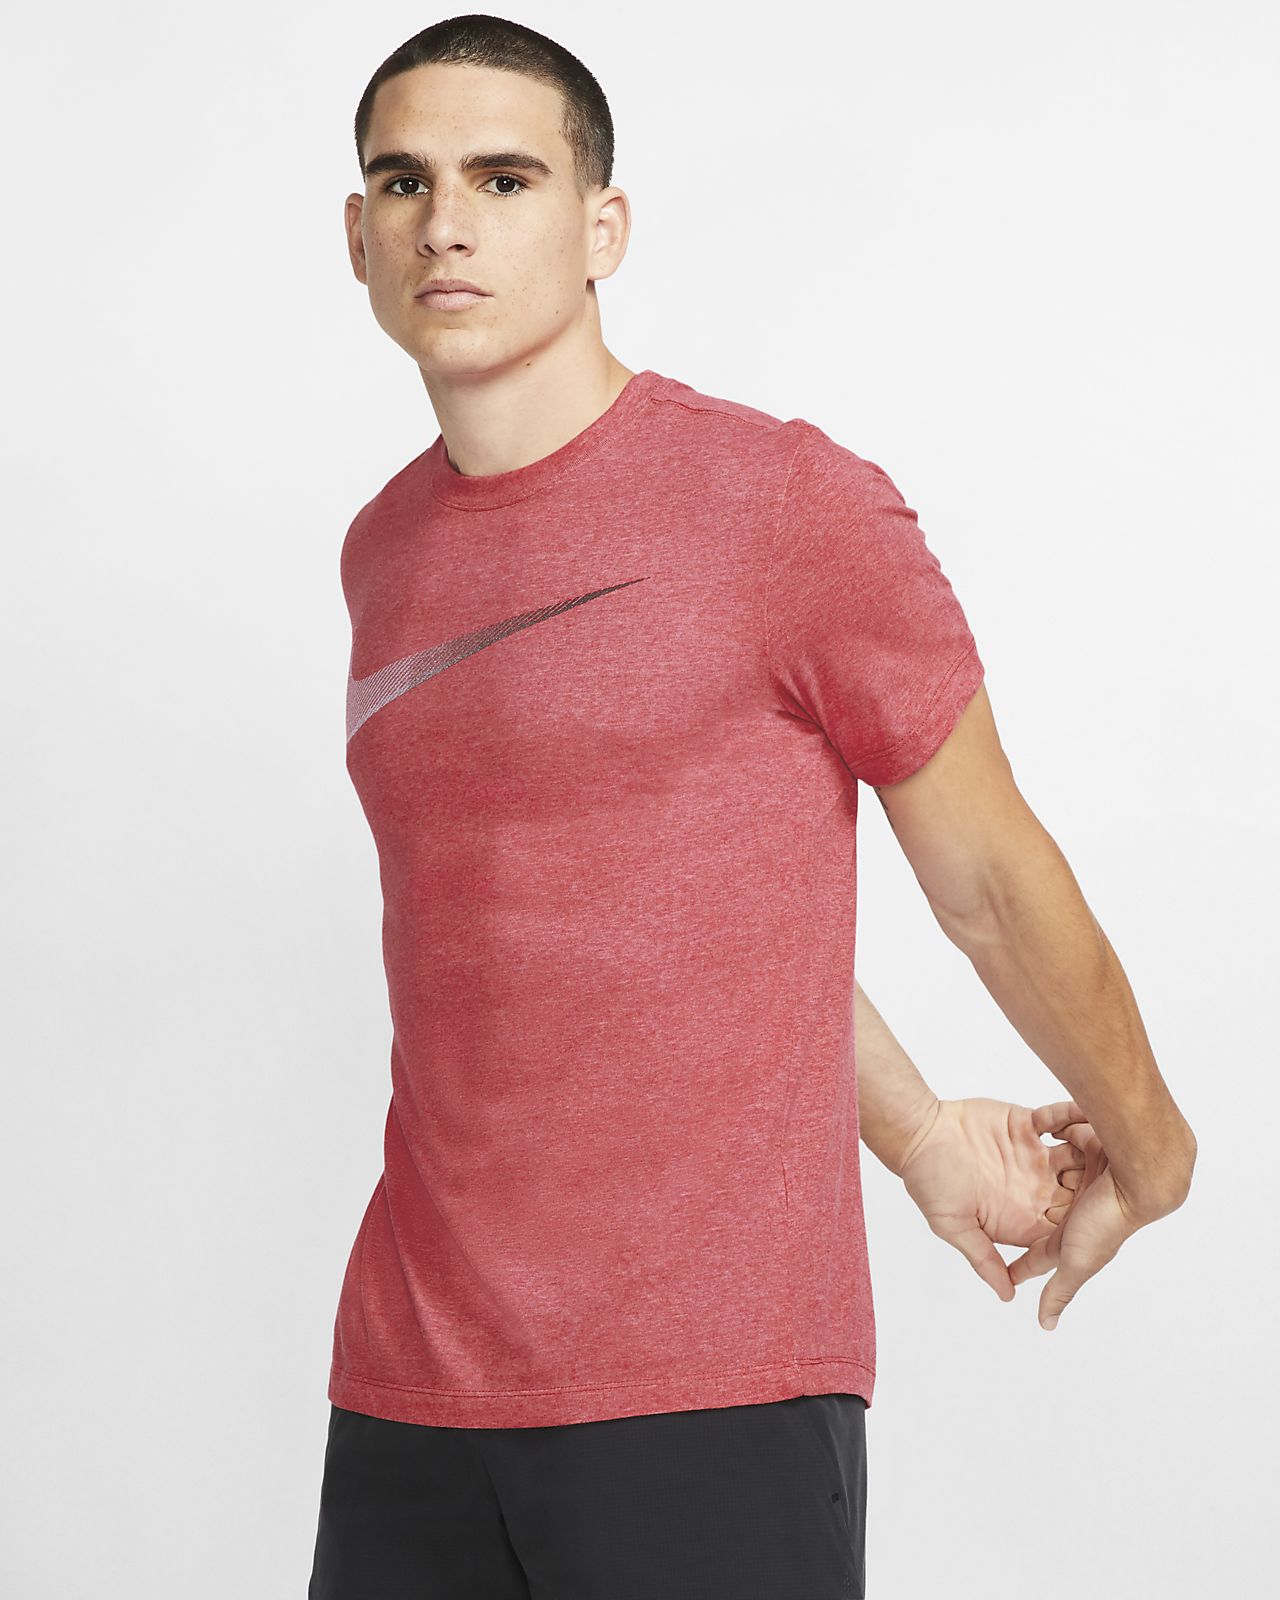 Hand nike dri fit mens training t shirt online india quince